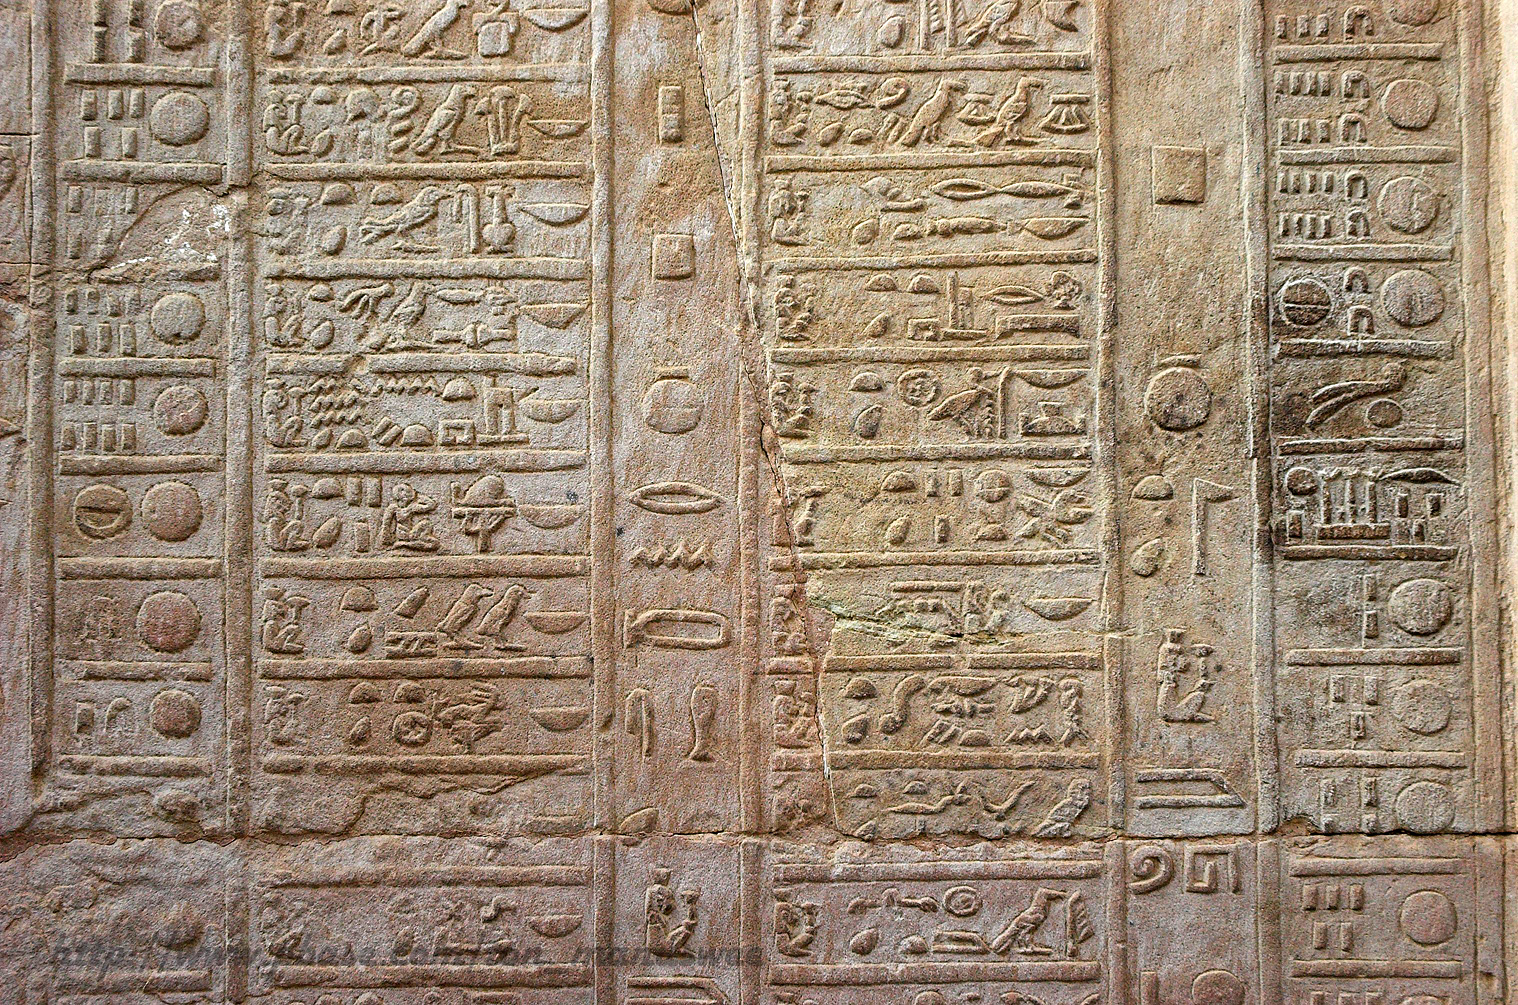 An ancient Egyptian ten day calendar carved into stone